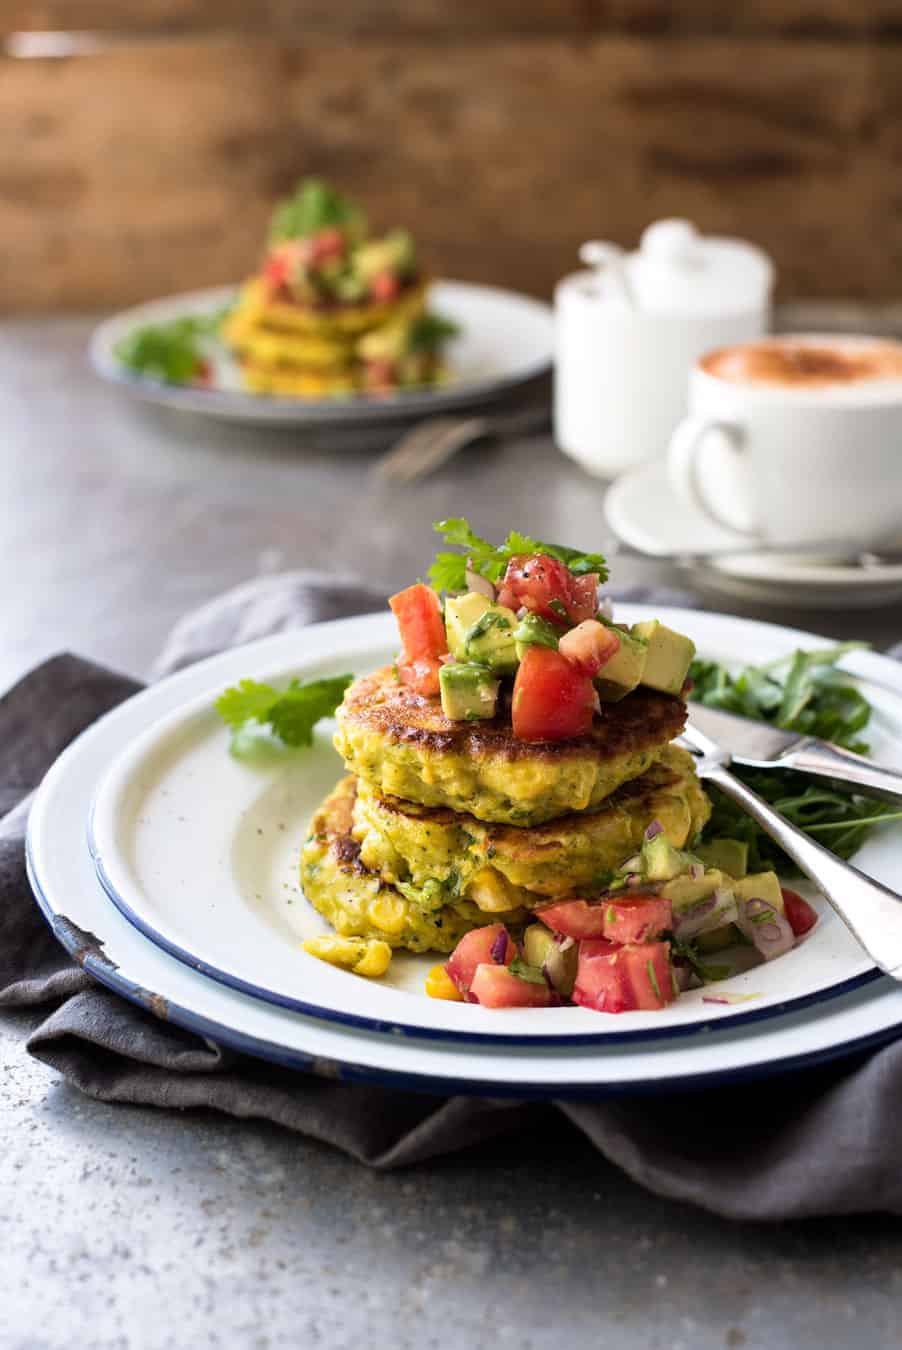 A stack of Bill Granger's Corn Fritters with Avocado Salsa